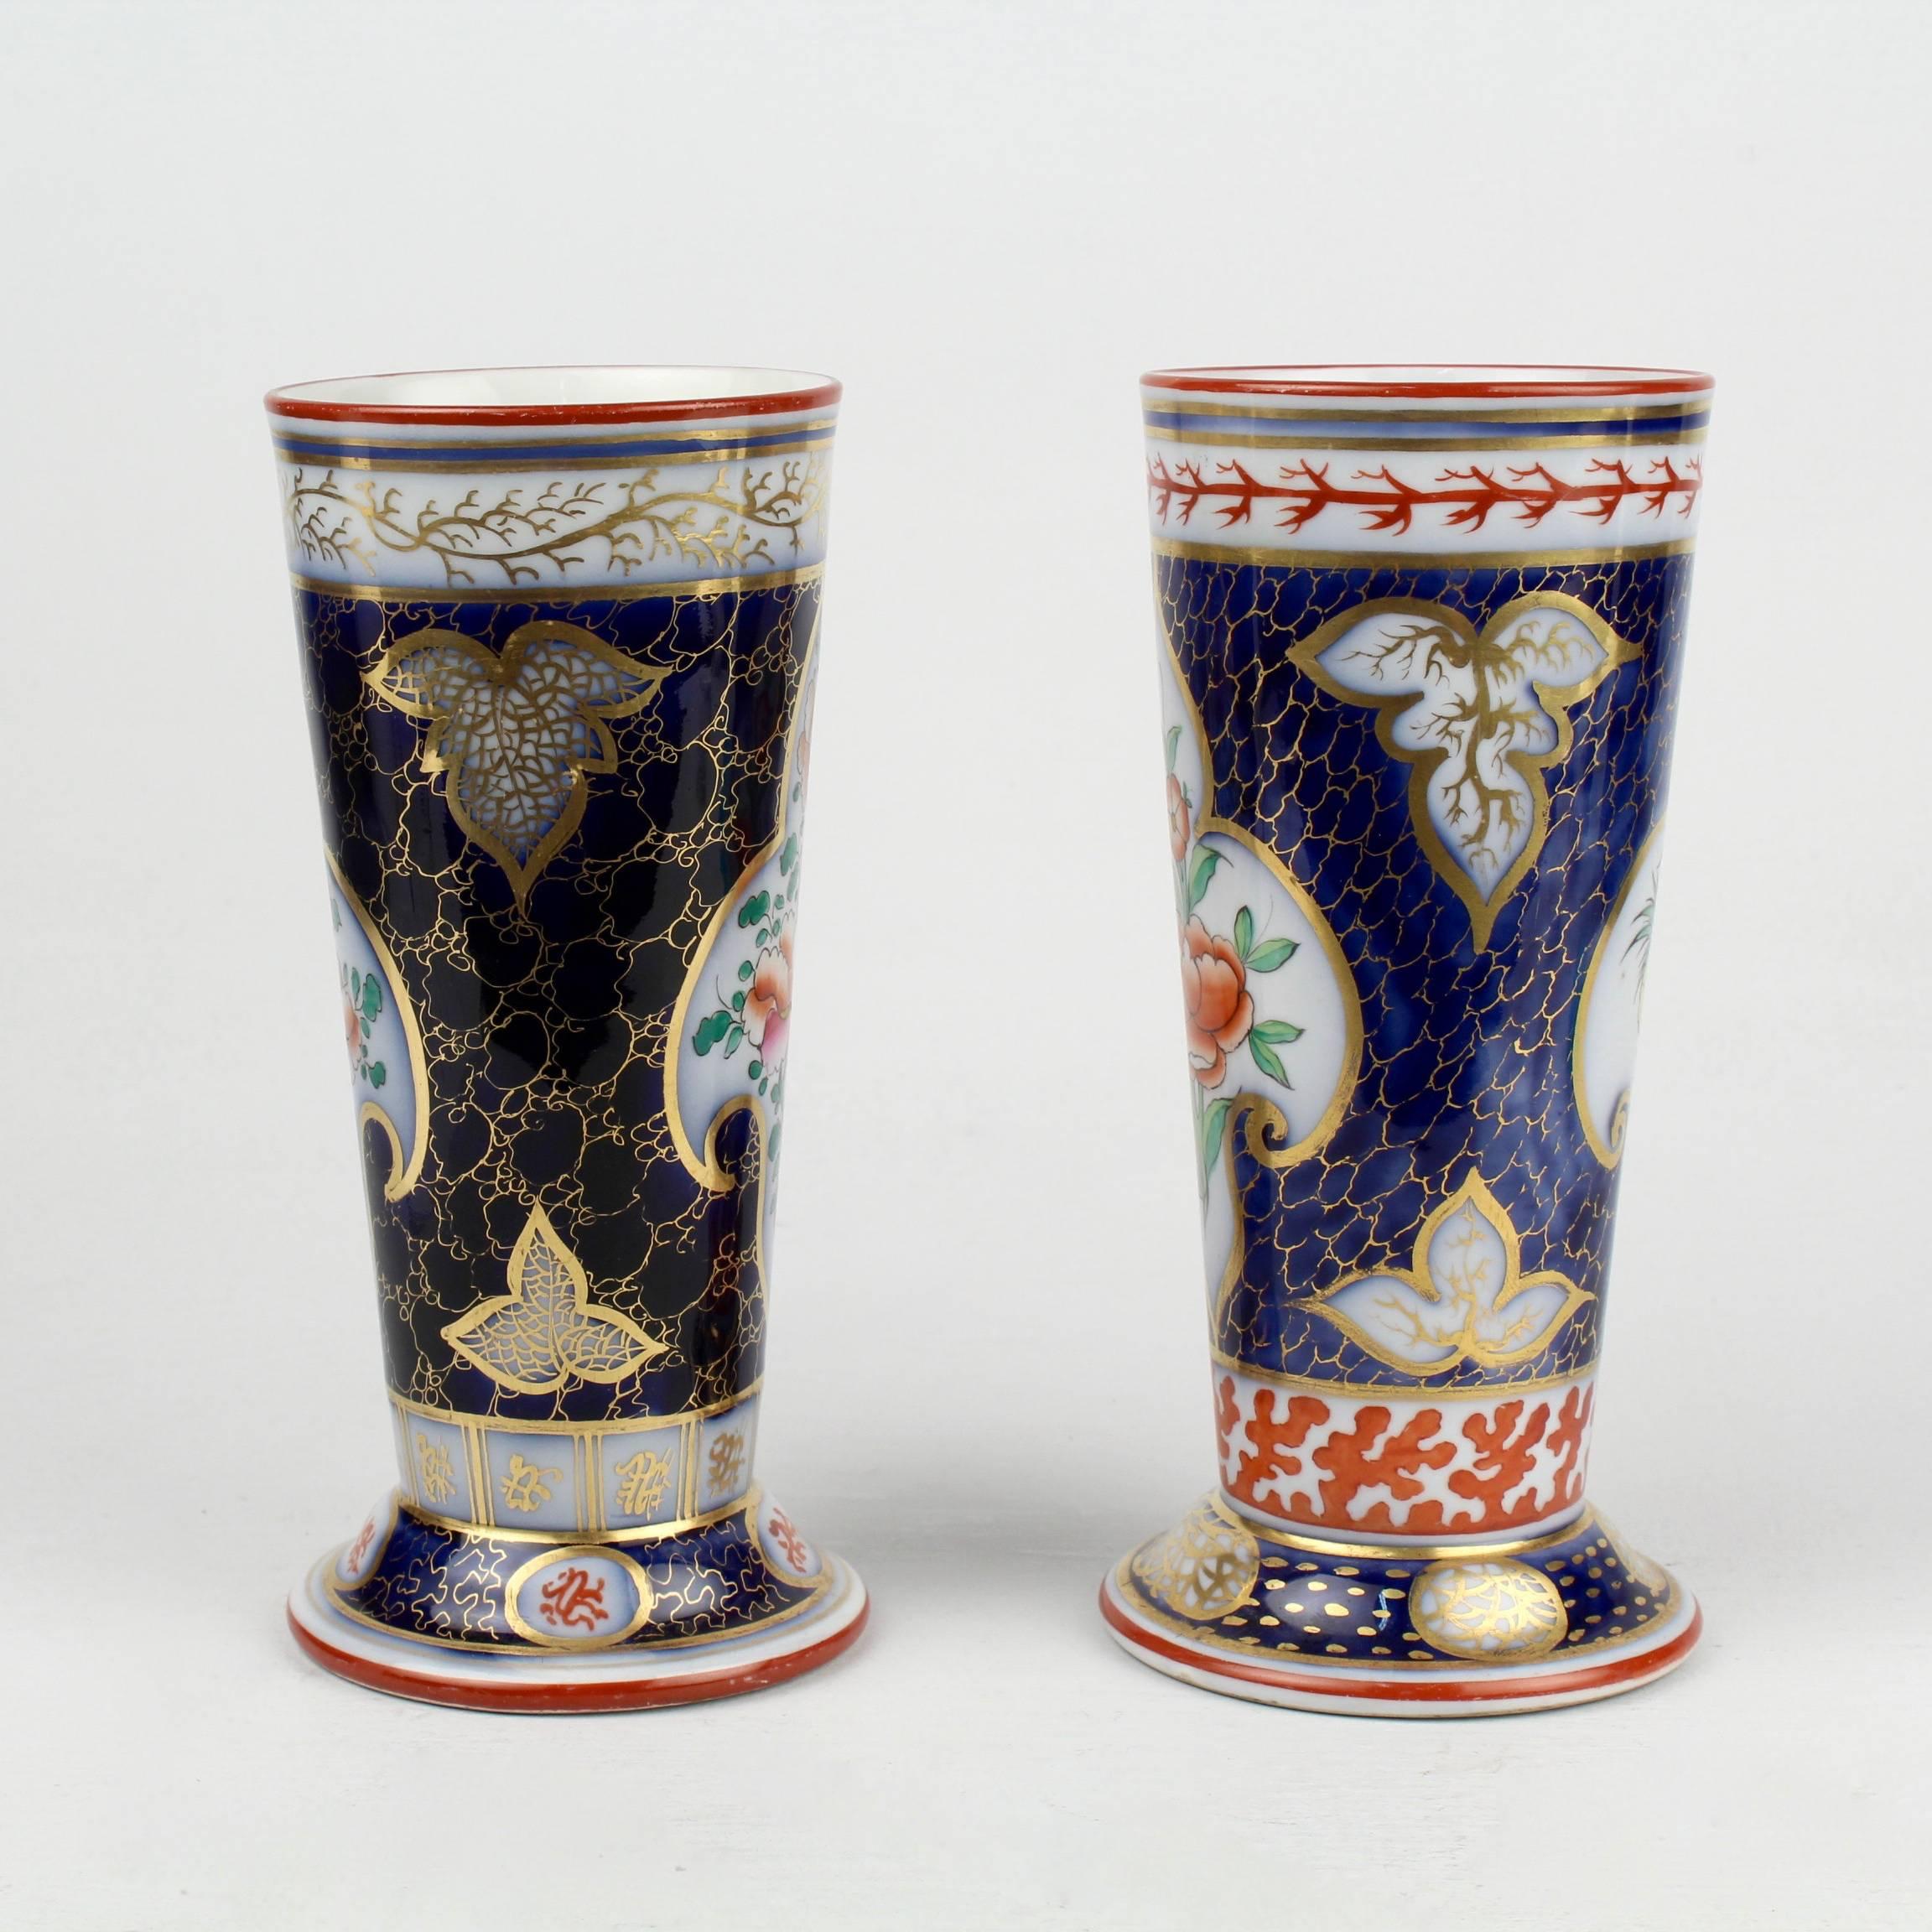 A fine associated pair of English flow blue aesthetic movement period porcelain vases with a blue ground, coral, green and gold decoration. The central cartouches have floral decorations. The remaining spaces are decorated with varying cell and